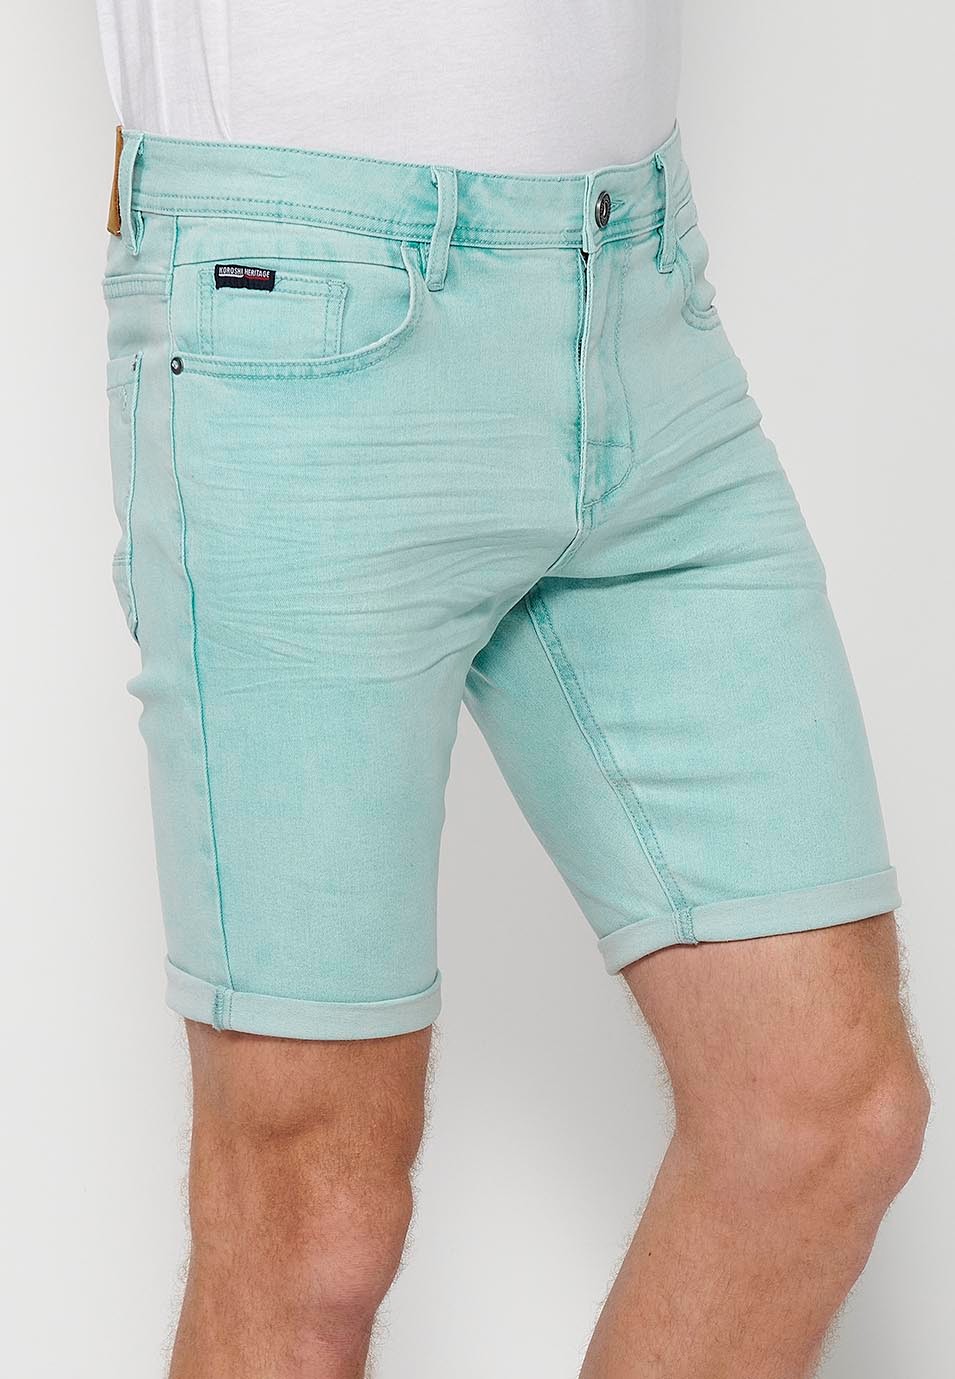 Shorts with turn-up closure with front zipper and button closure and five pockets, one blue pocket pocket for Men 5